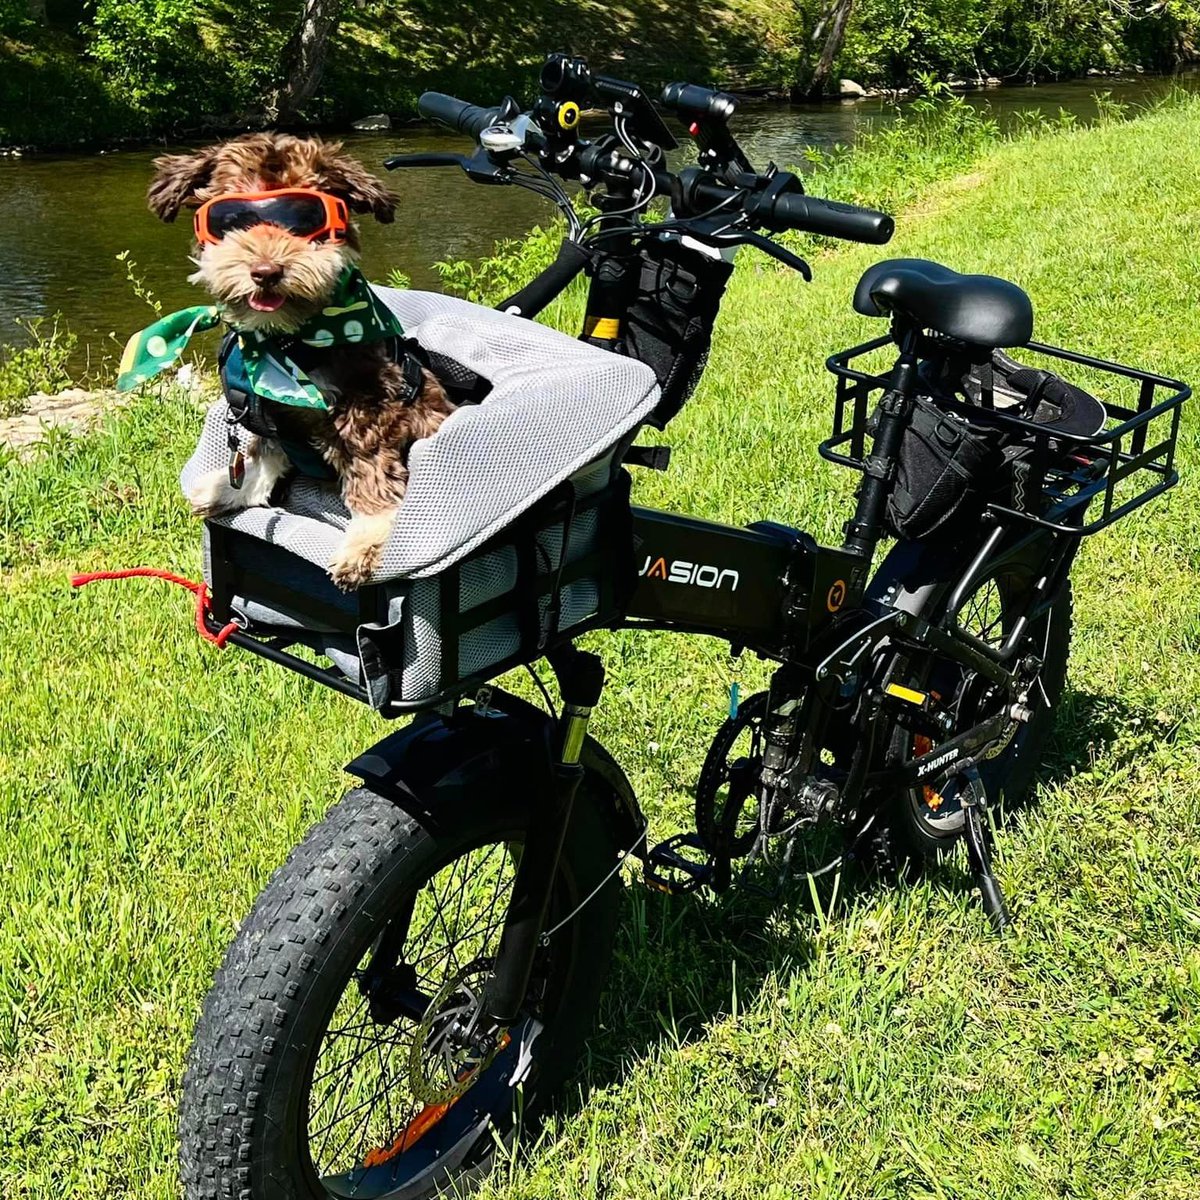 The doggie social scene is blowing up! Why? Because they're gearing up to hop on the Jasion® X-Hunter Ebike for an exhilarating forest adventure! Guaranteed to make your furry friends green with envy!
#jasionbike
#jasionxhunter
#jasioneb7
#doglover
#jasioneb7st
#DogAdventure